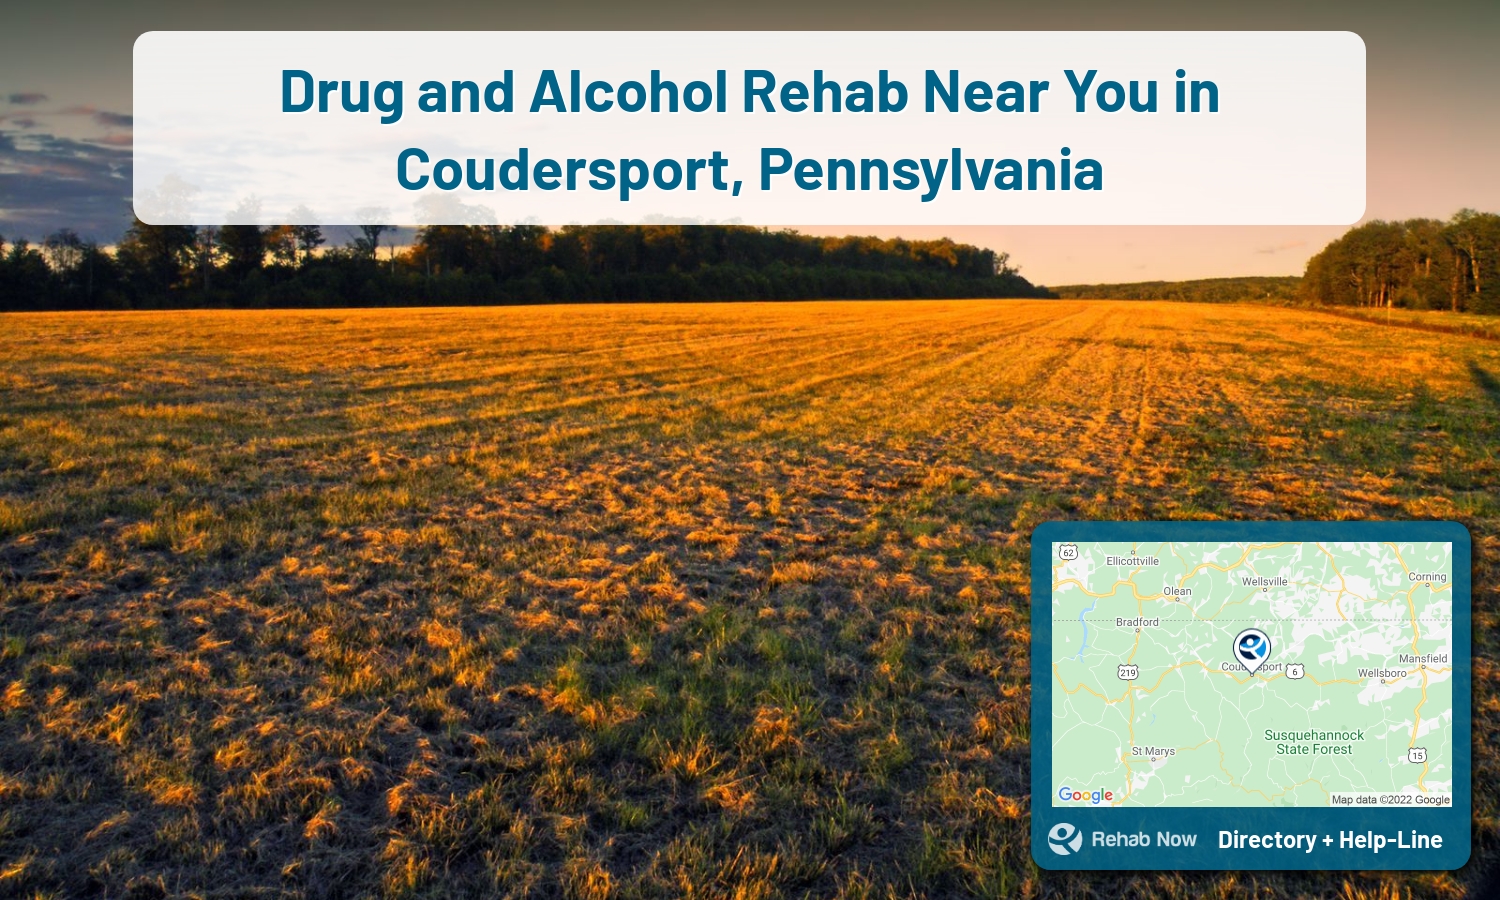 Find drug rehab and alcohol treatment services in Coudersport. Our experts help you find a center in Coudersport, Pennsylvania